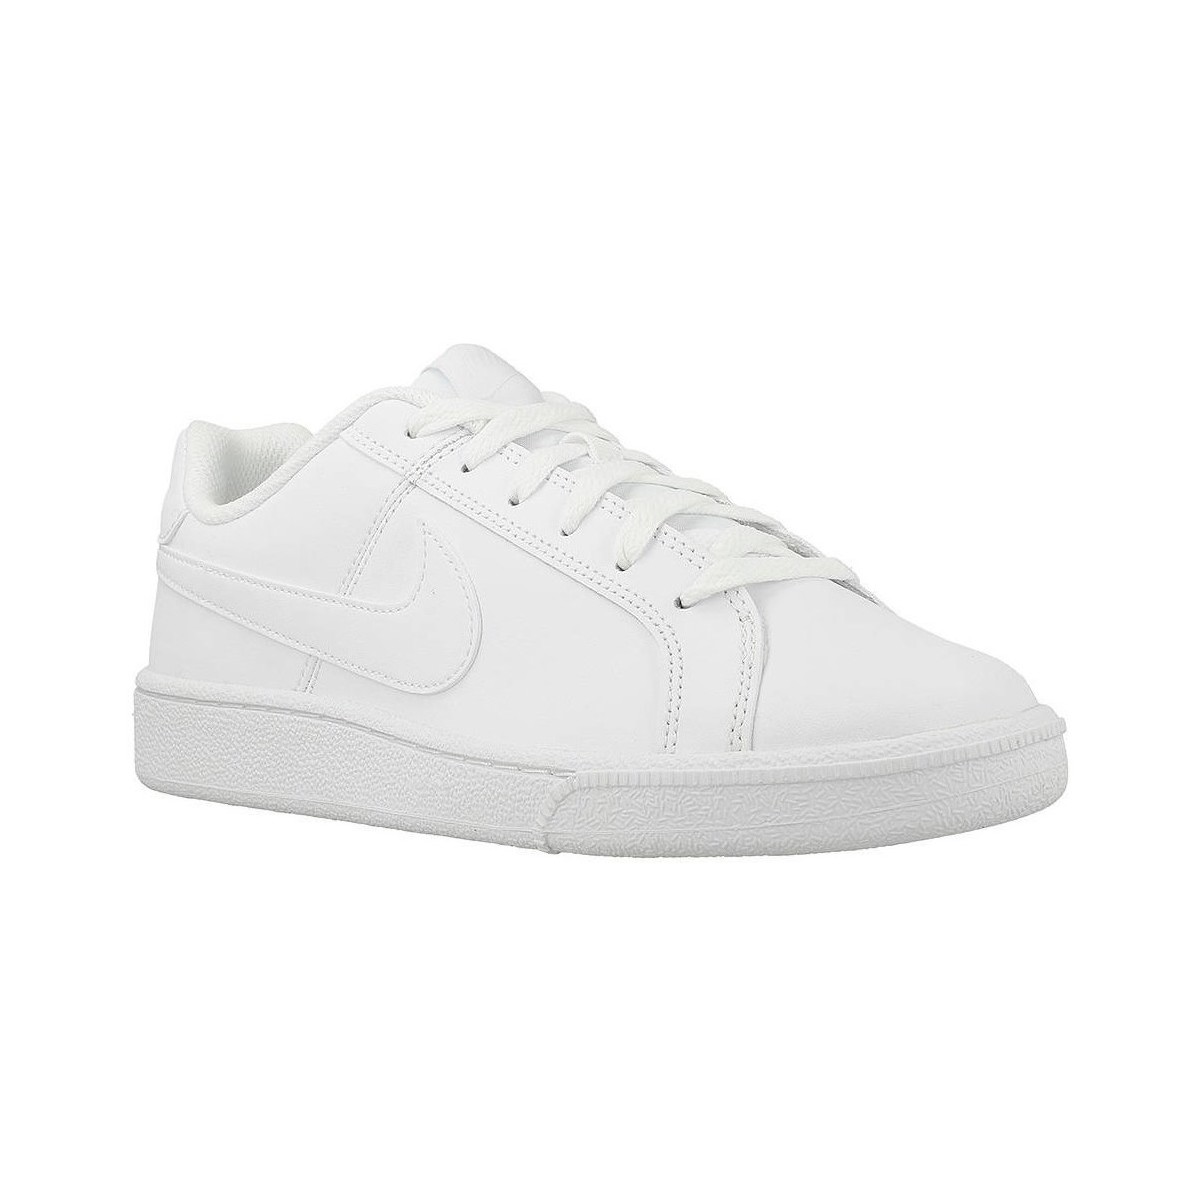 Shoes Women Low top trainers Nike Court Royale White